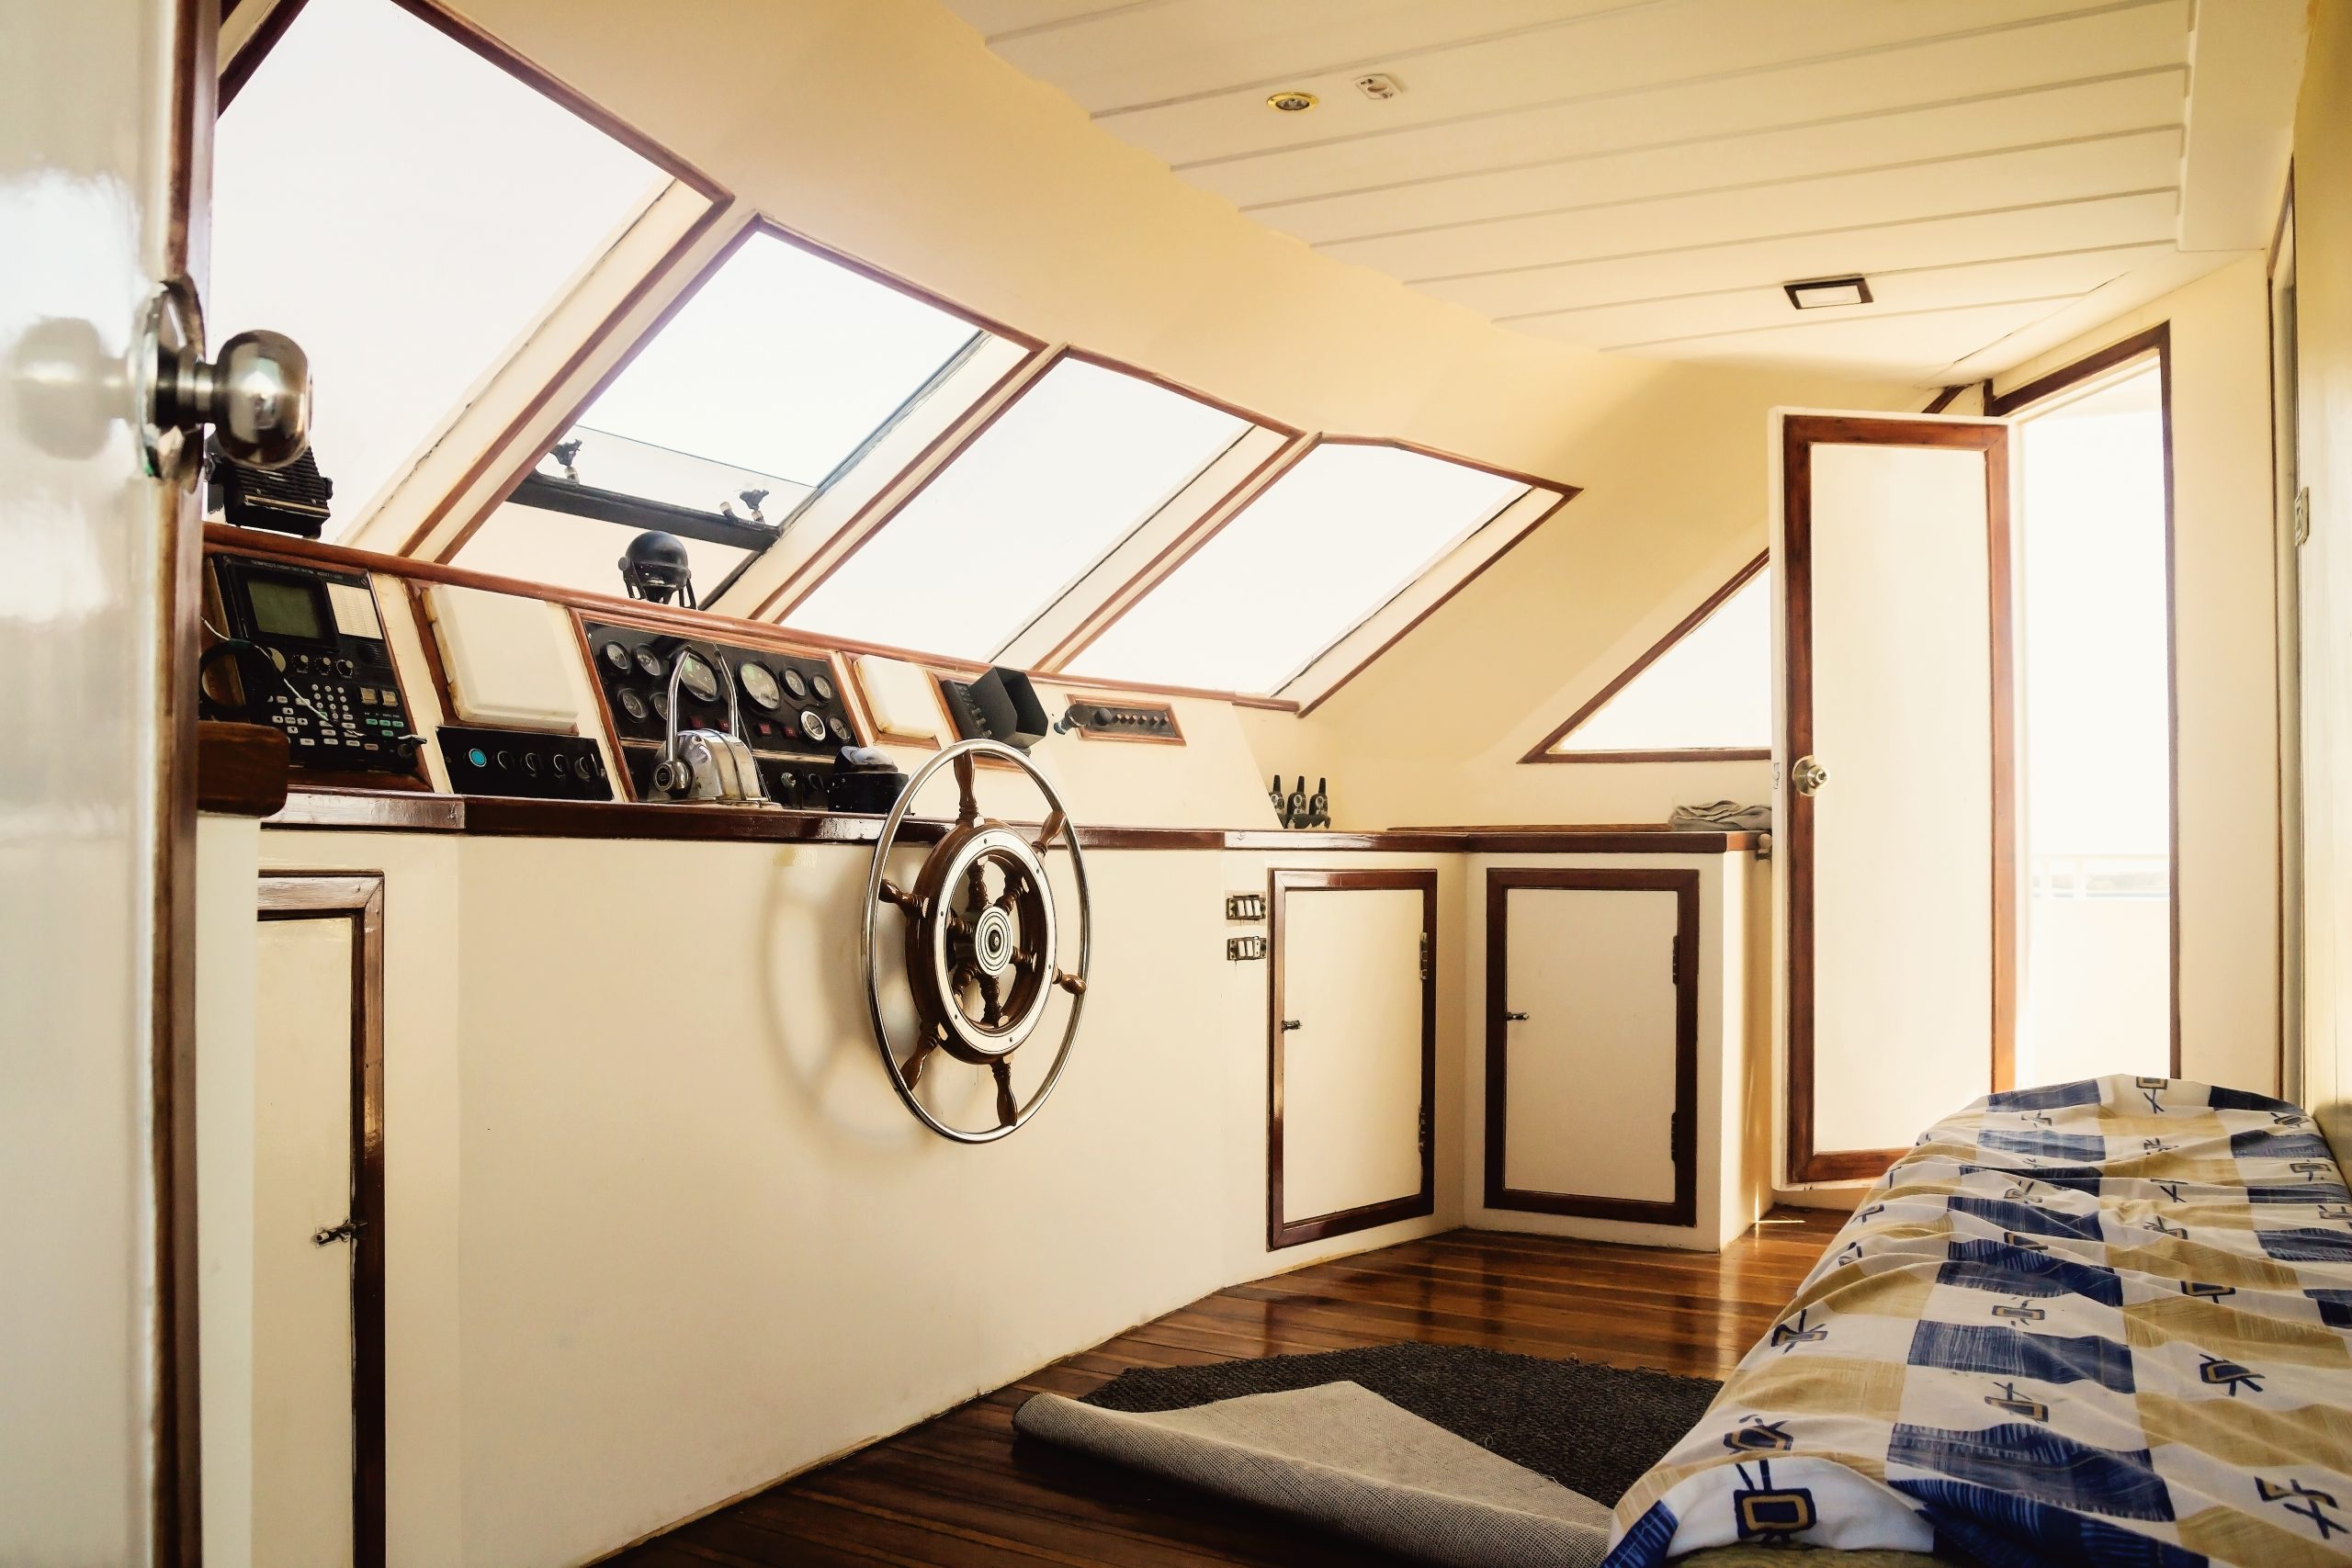 Captain's cabin and steering wheel, close-up on a yacht.